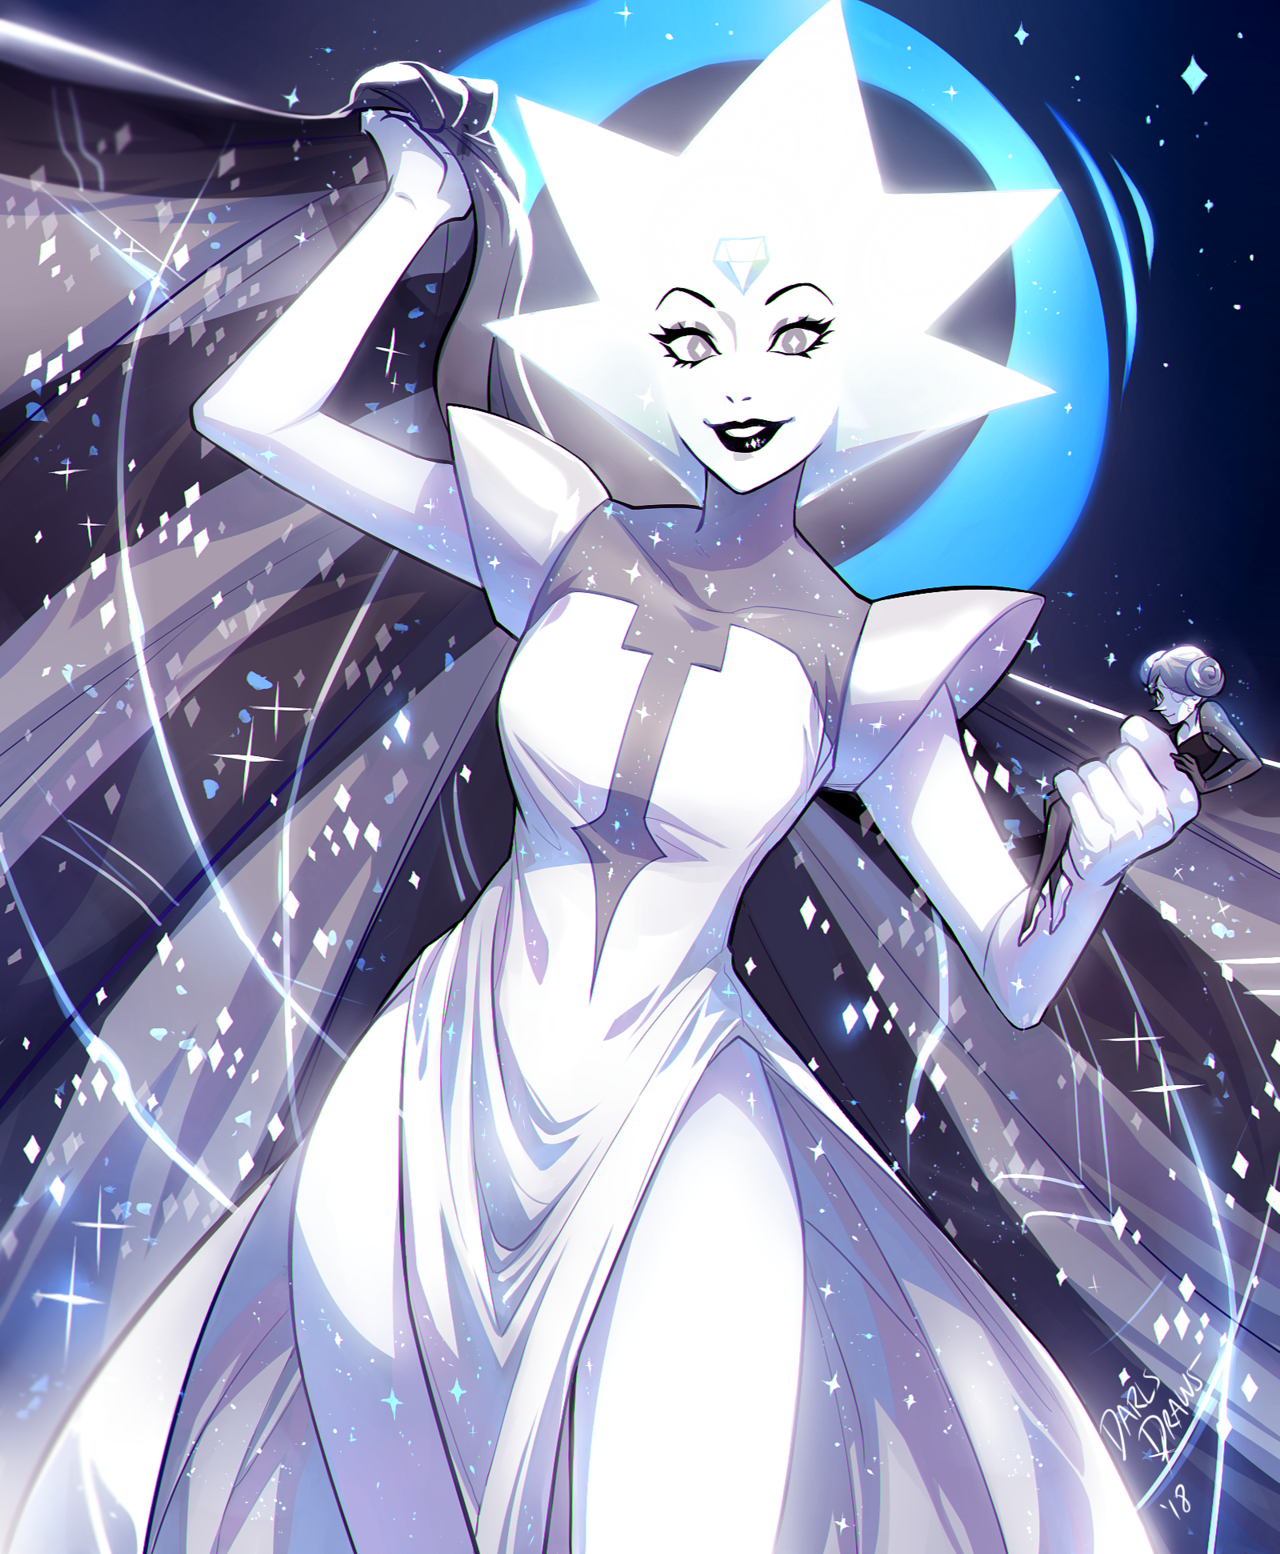 White Diamond finally! She was a bit harder to draft but still fun to color! One more Diamond to go and I can finish my set 😩😩 YOUTUBE / TWITTER / INSTAGRAM